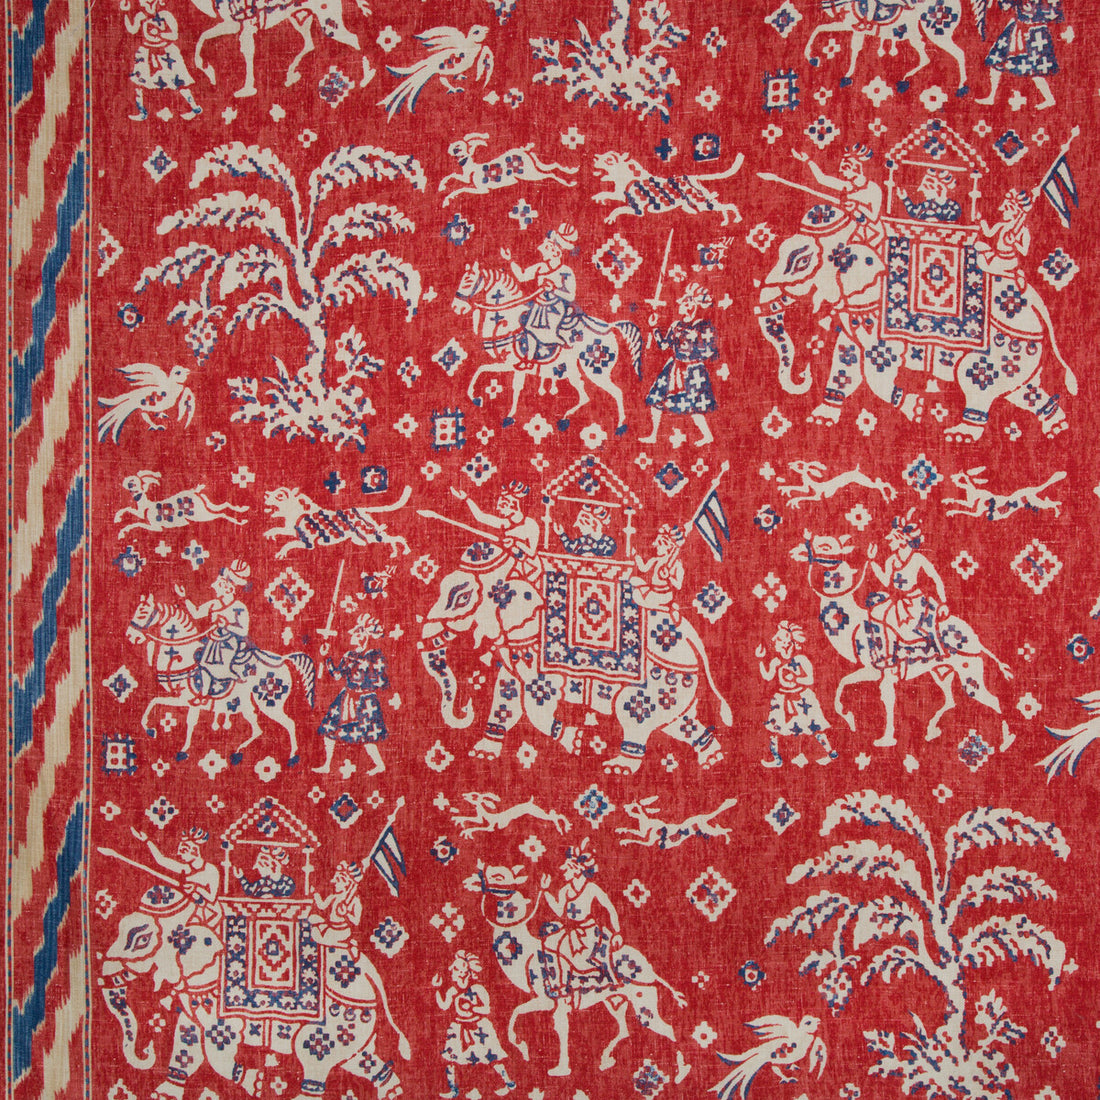 Aralam Print fabric in flame/cadet color - pattern 8015175.195.0 - by Brunschwig &amp; Fils in the Cape Comorin collection